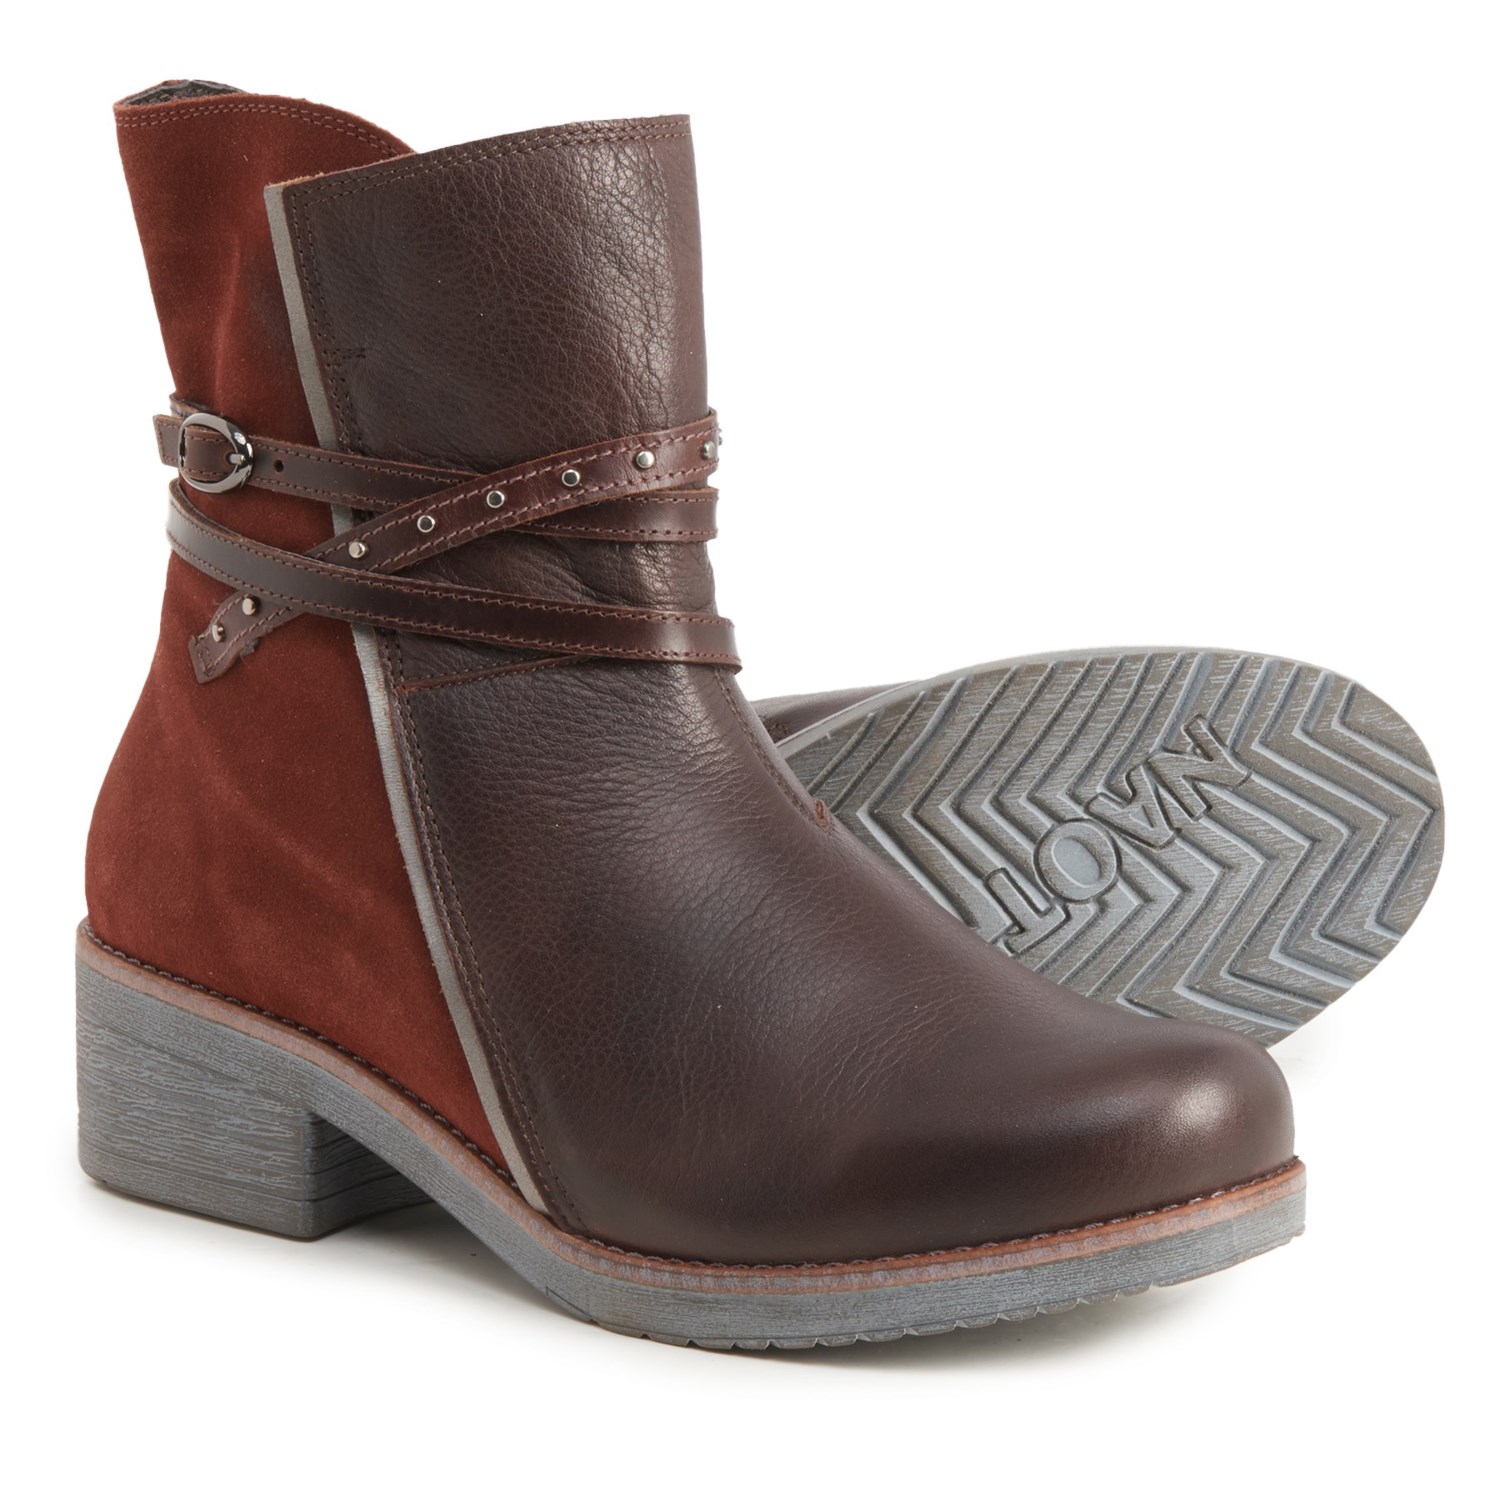 Naot Poet Boots (For Women) - Save 65%